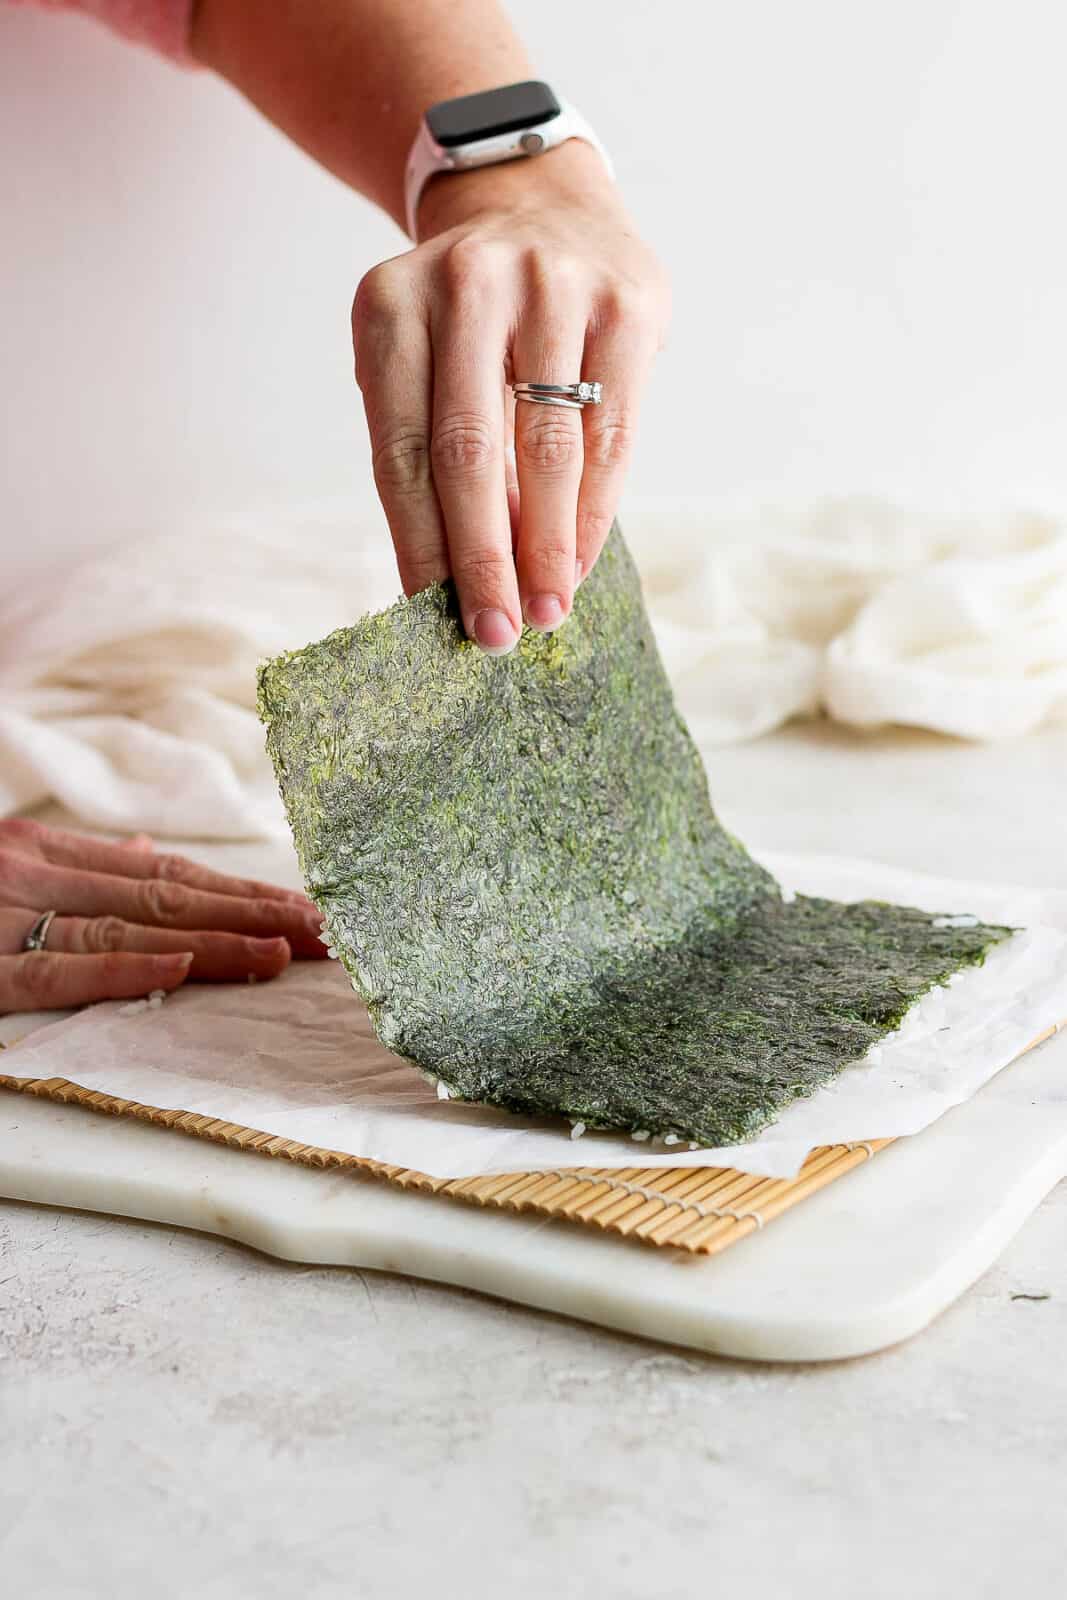 Setting the nori sheet back down on top of the parchment paper, rice-side down.